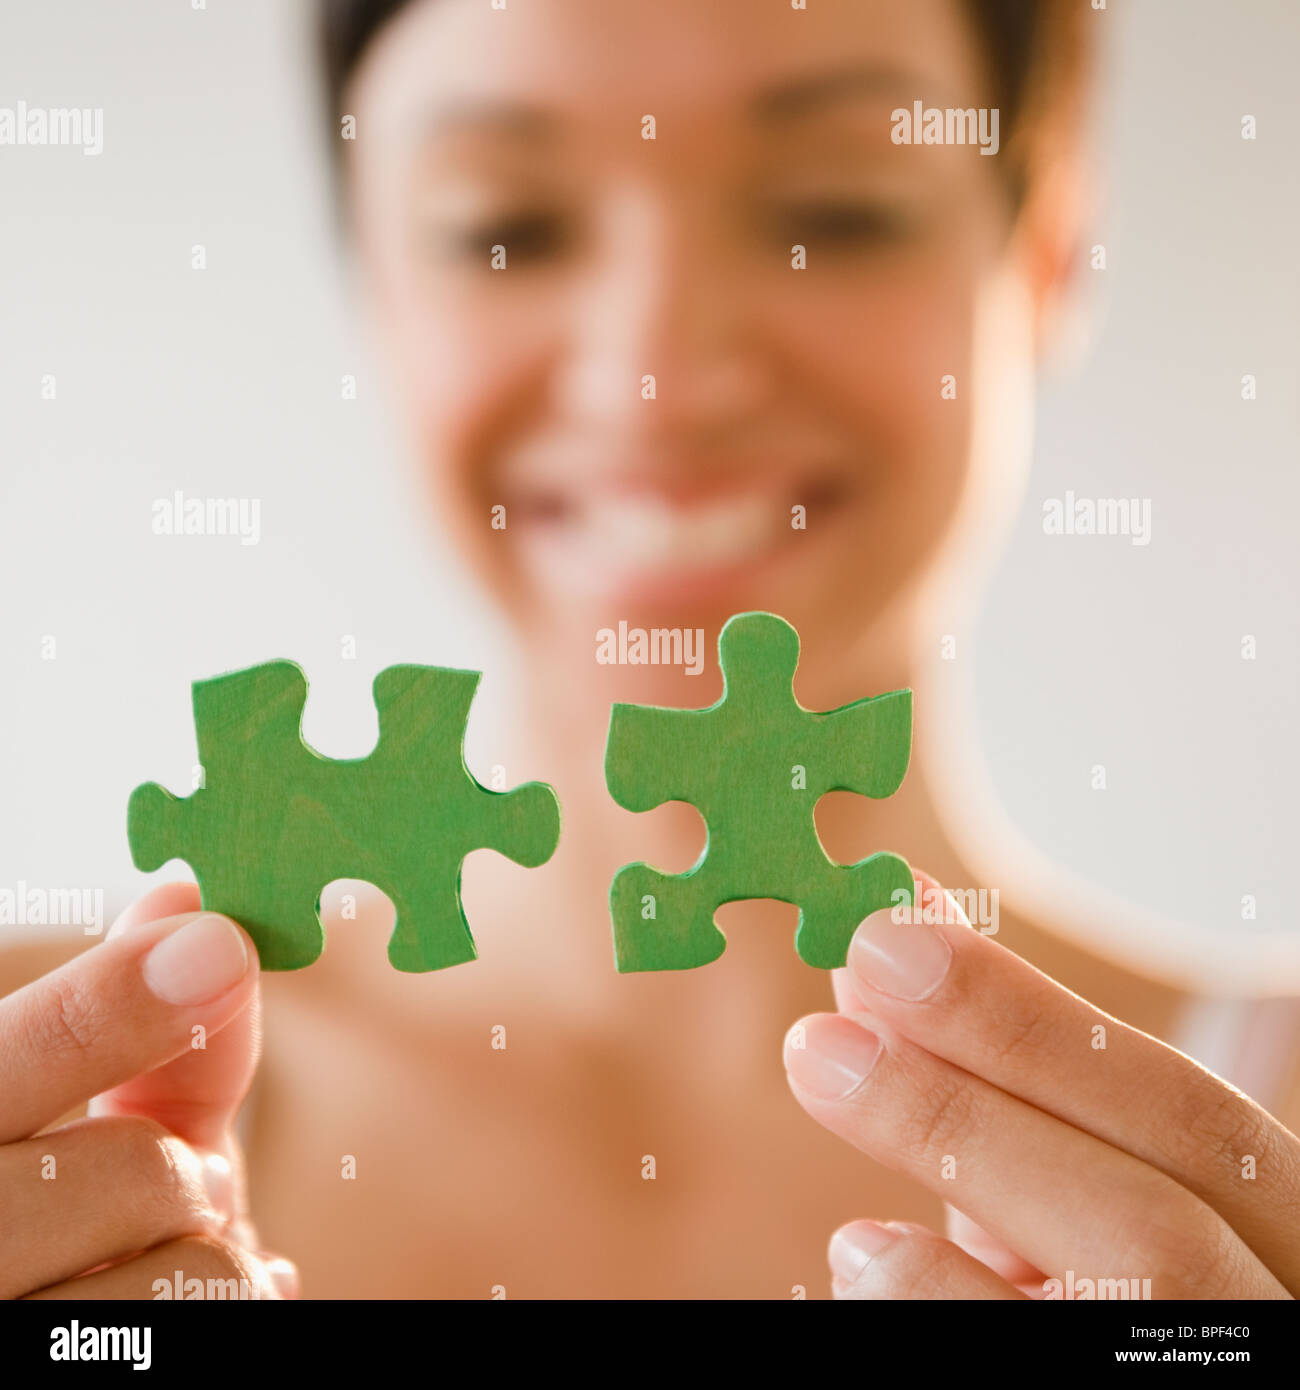 Mixed Race woman holding green jigsaw puzzle pieces Banque D'Images